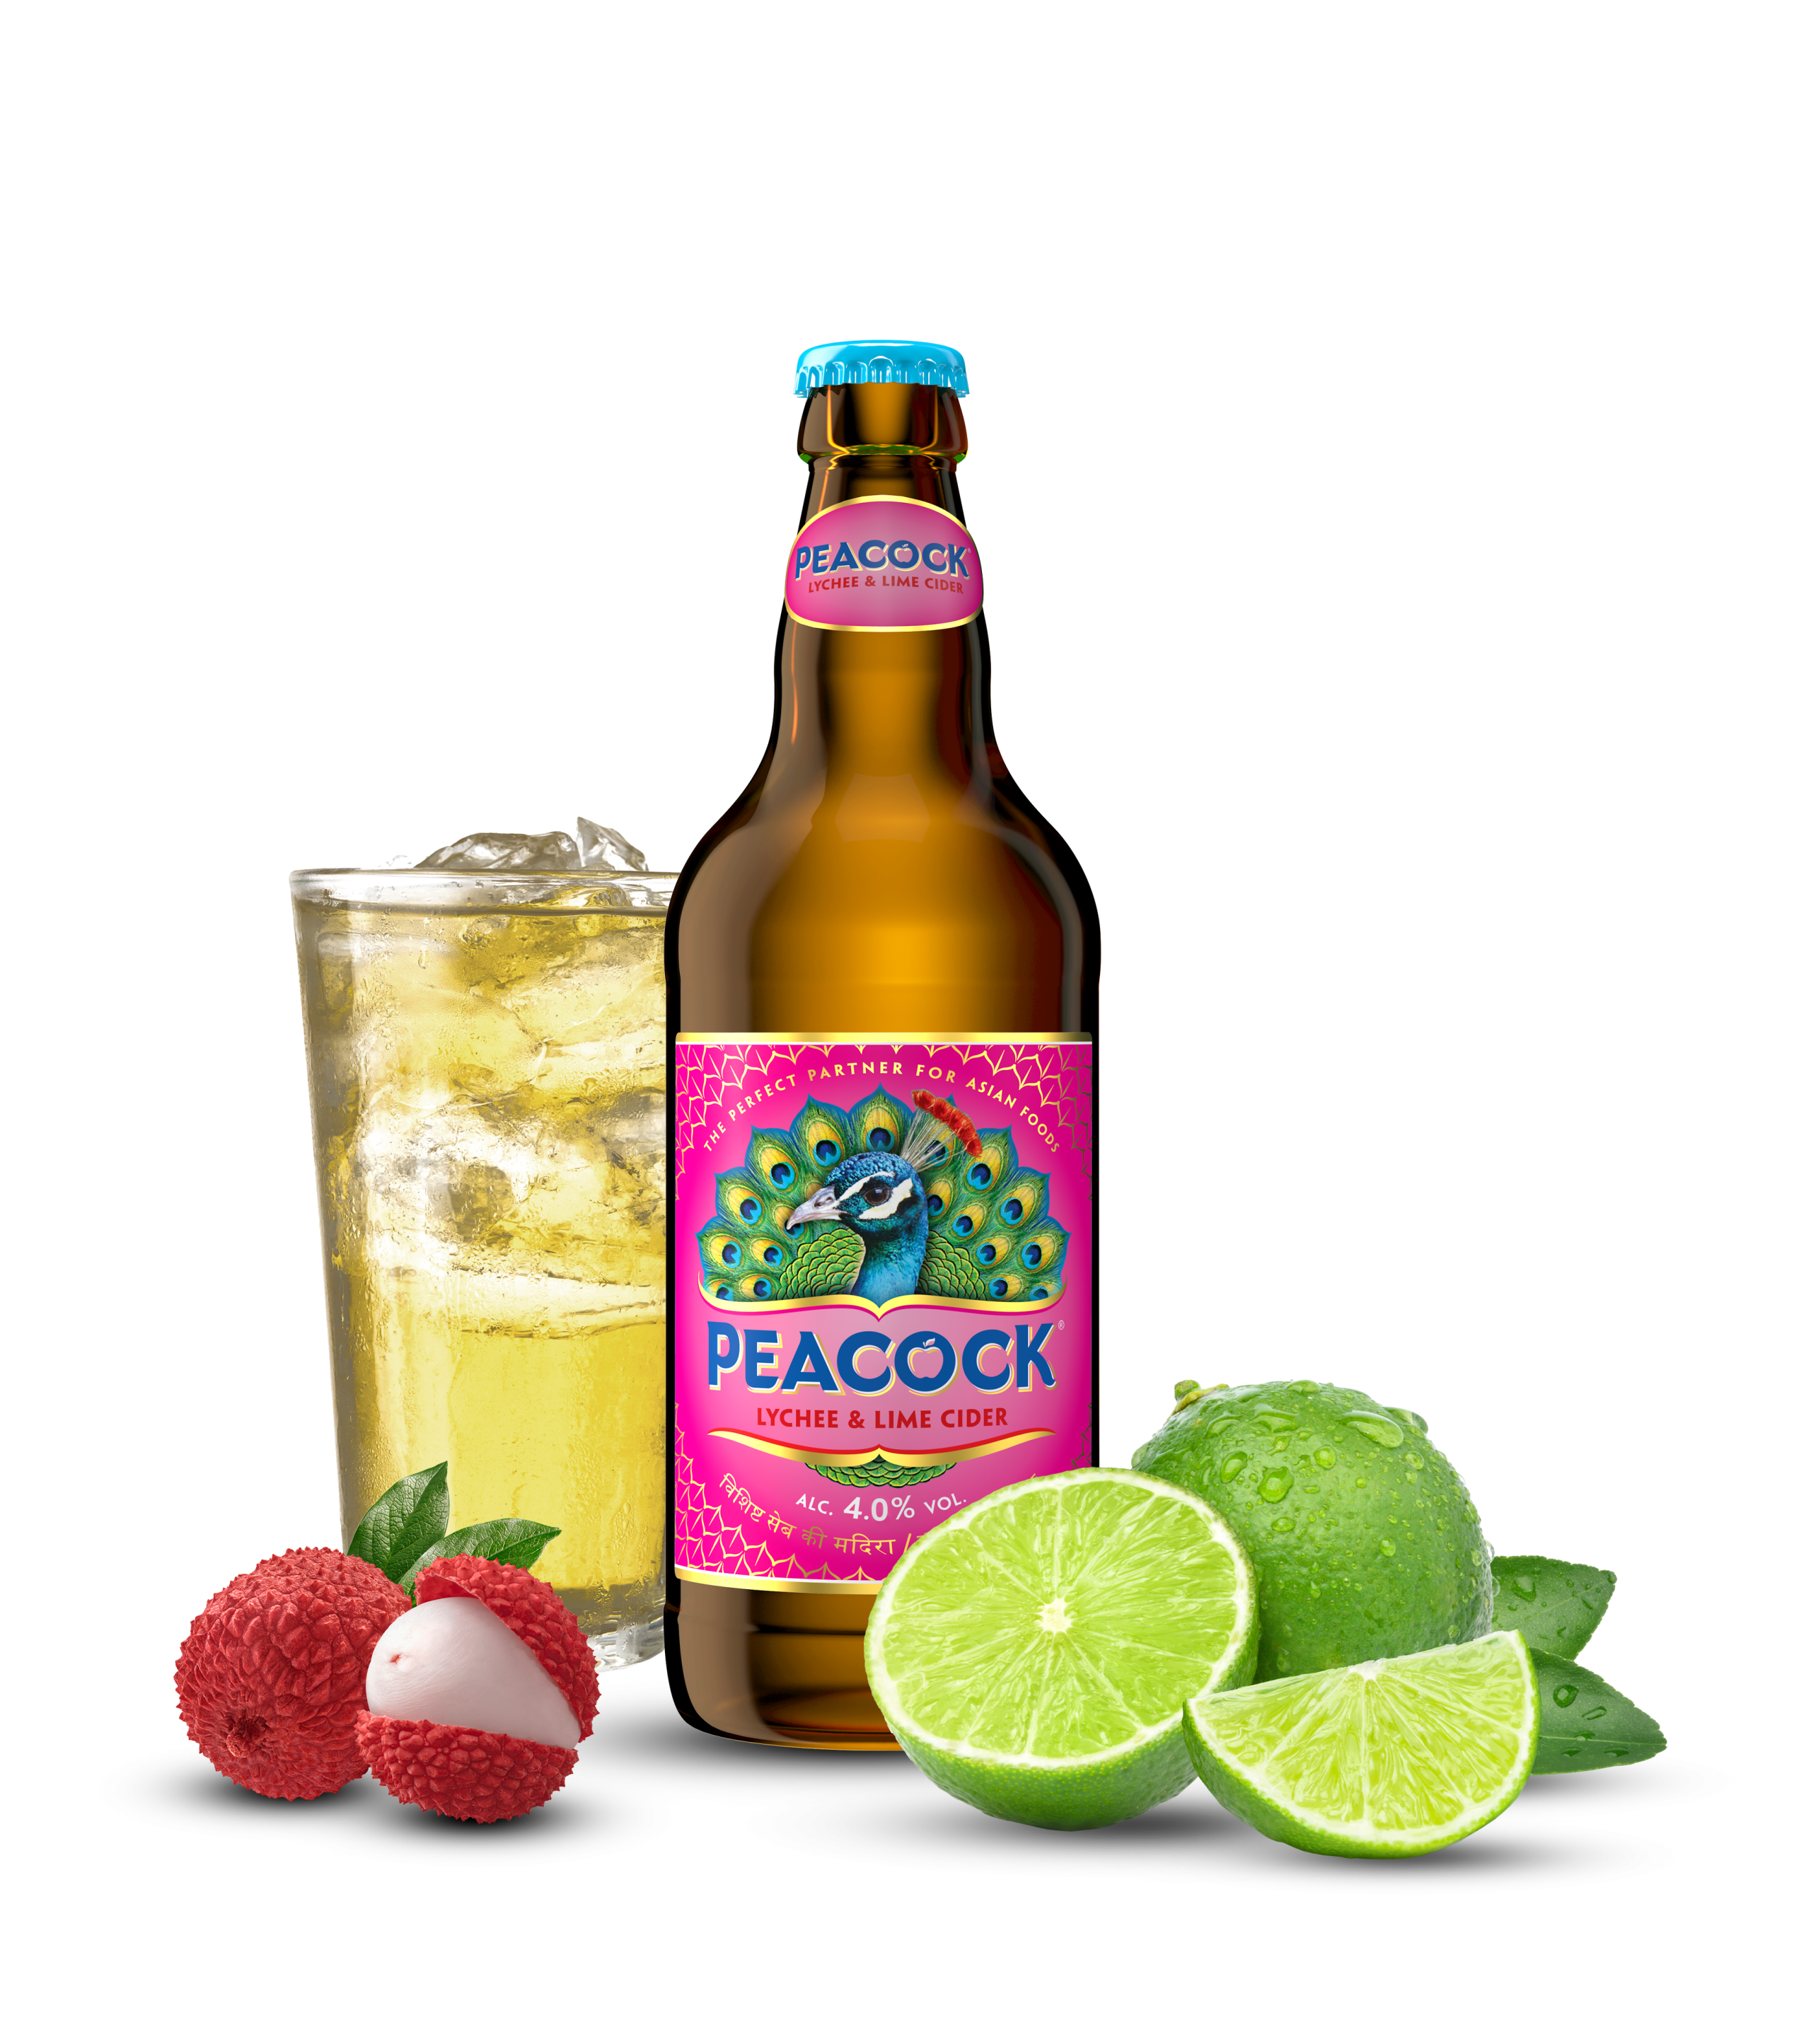 KBE launches new Lychee & Lime flavoured cider for Peacock brand